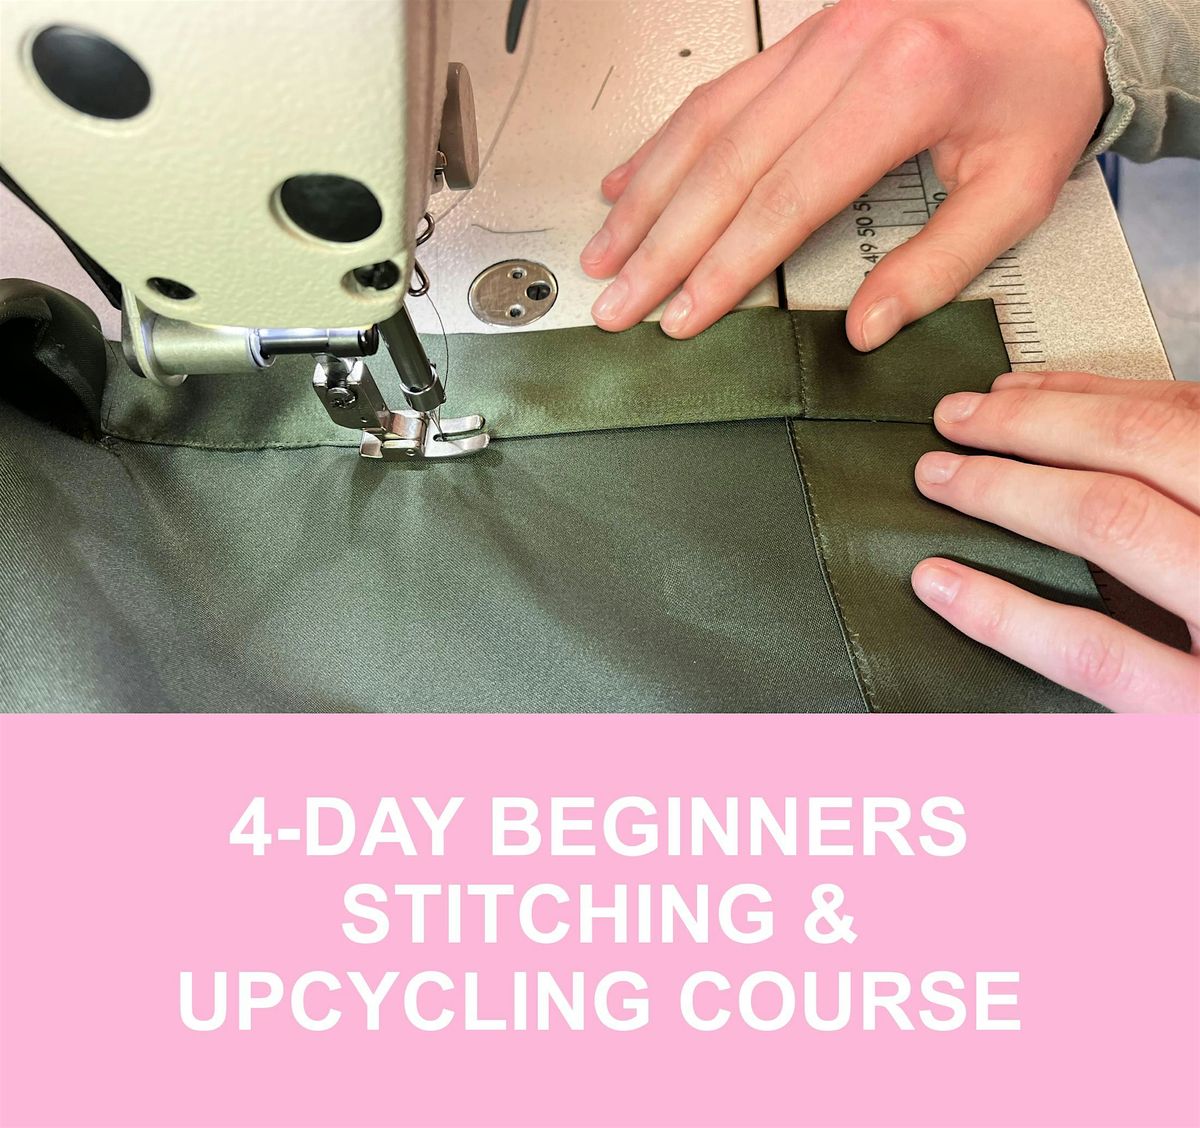 4 Day Beginners Stitching Course